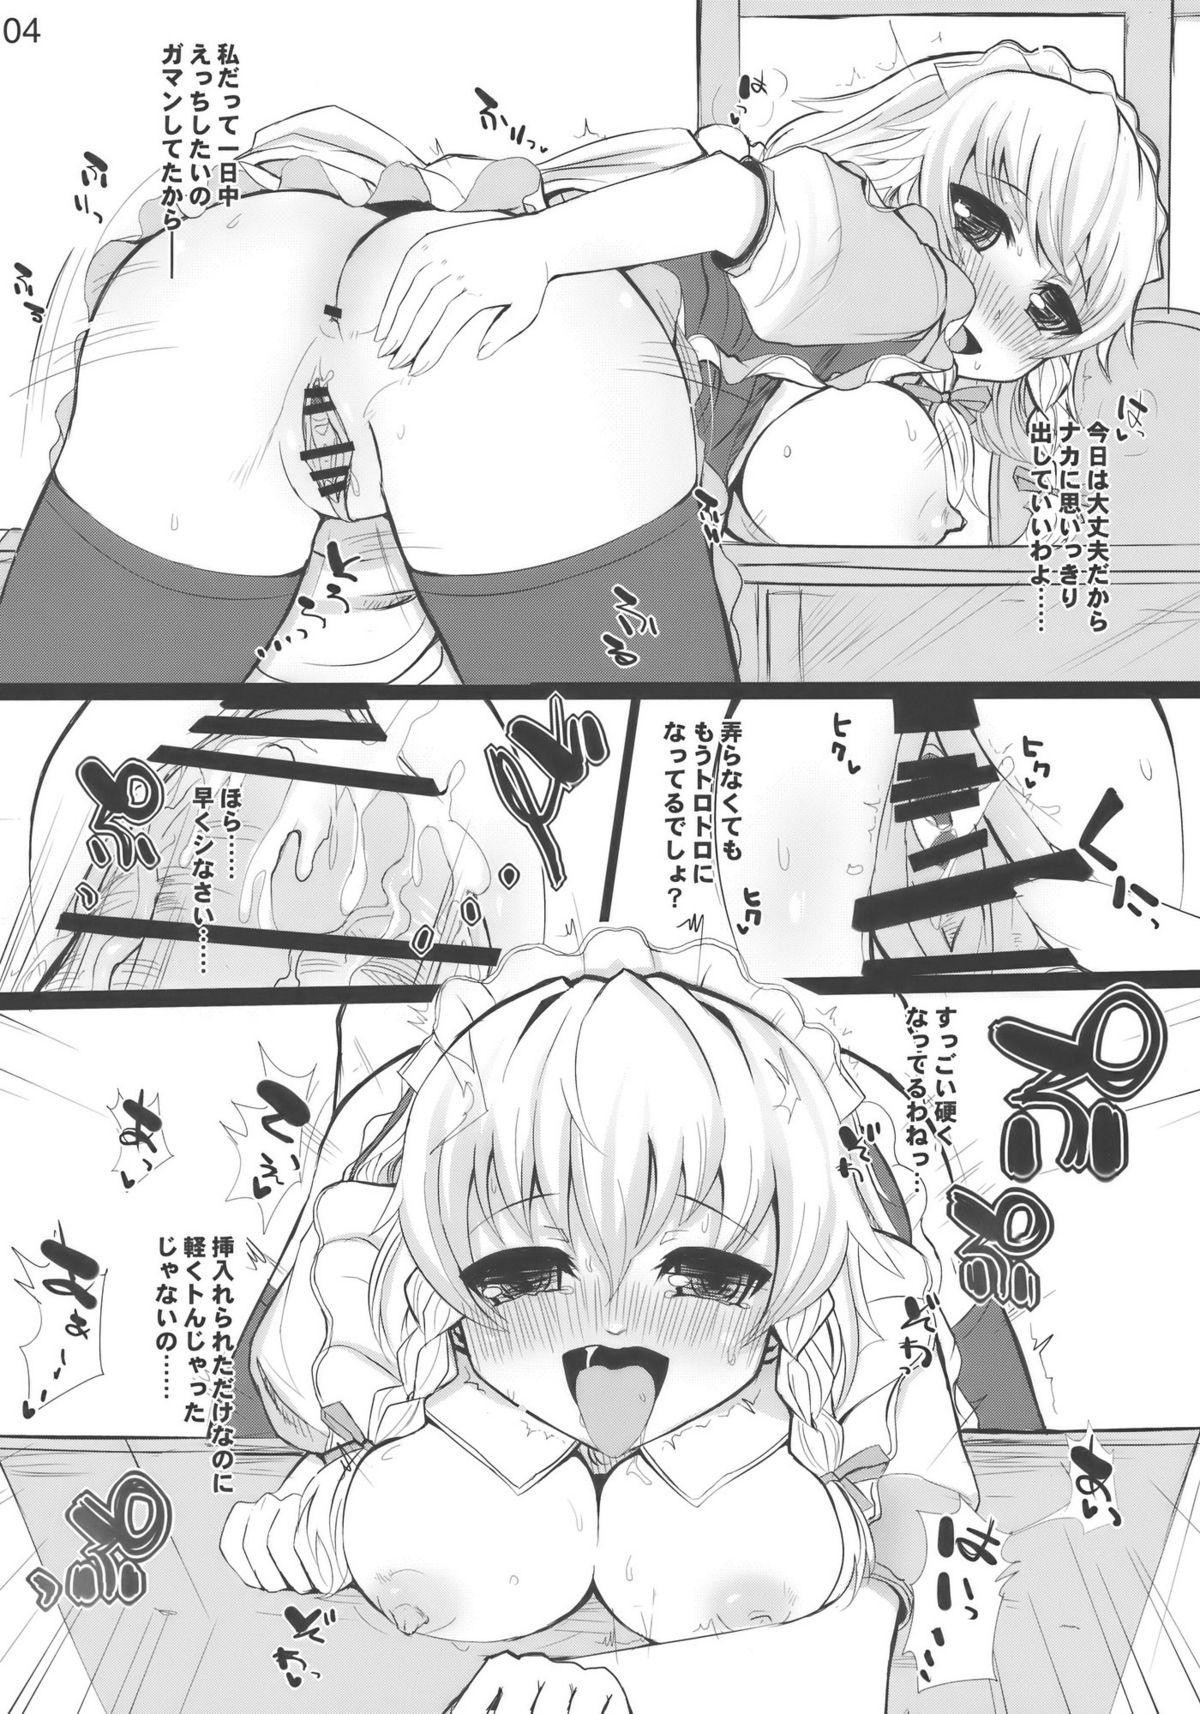 Japanese Feed me with your Kiss - Touhou project Hot Naked Girl - Page 4